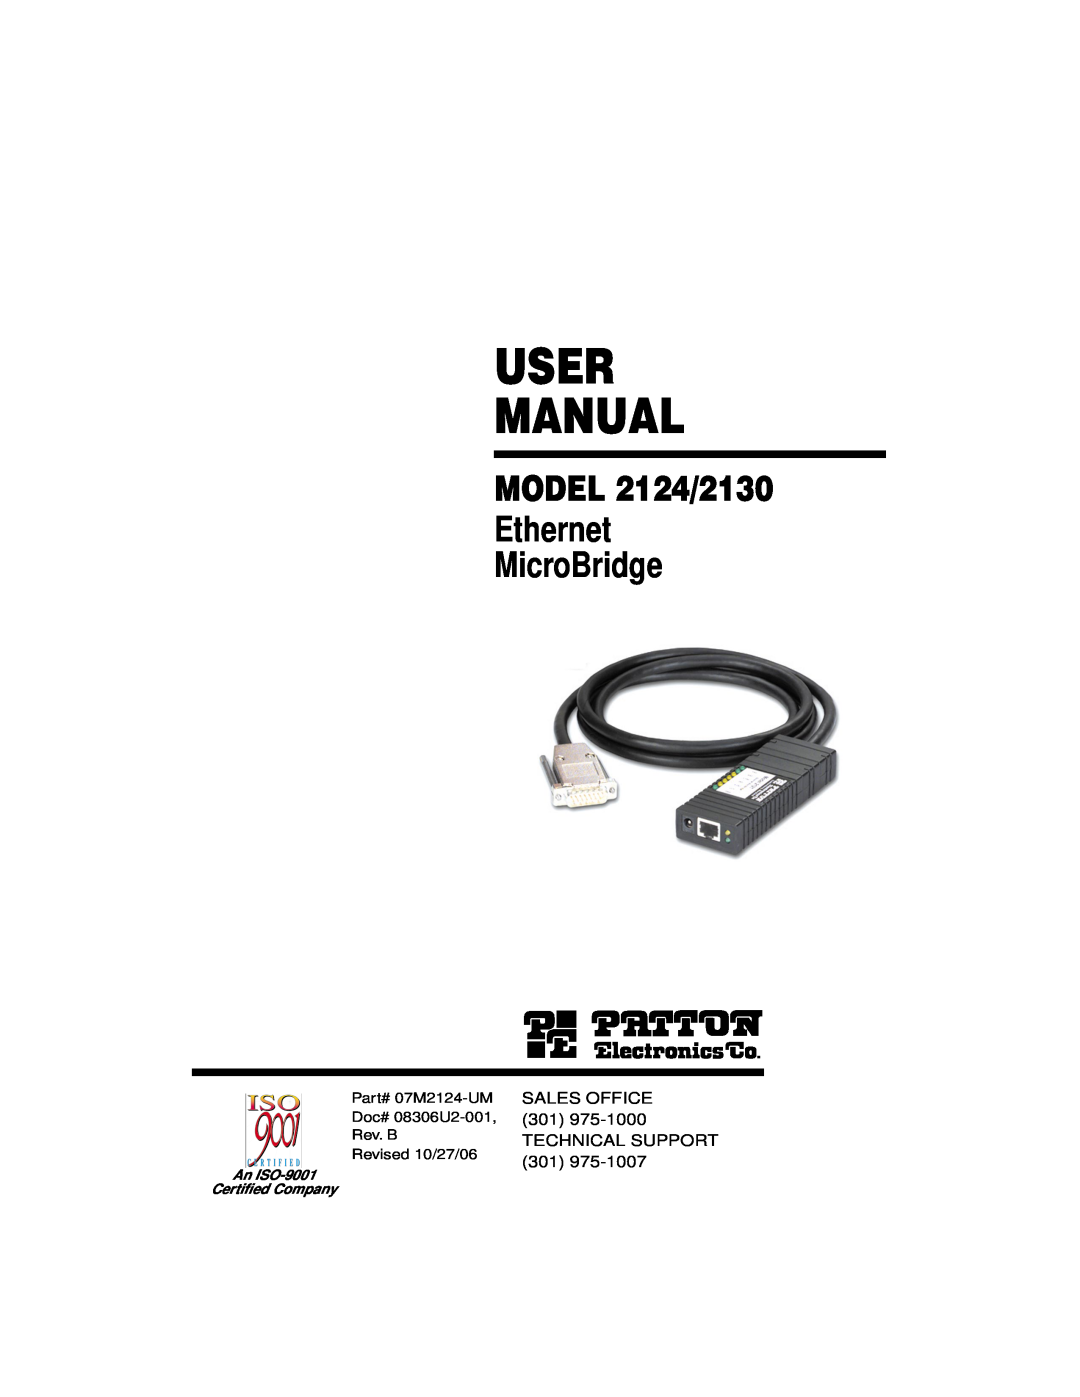 Patton electronic user manual User Manual, MODEL 2124/2130 Ethernet MicroBridge, An ISO-9001 Certiﬁed Company 